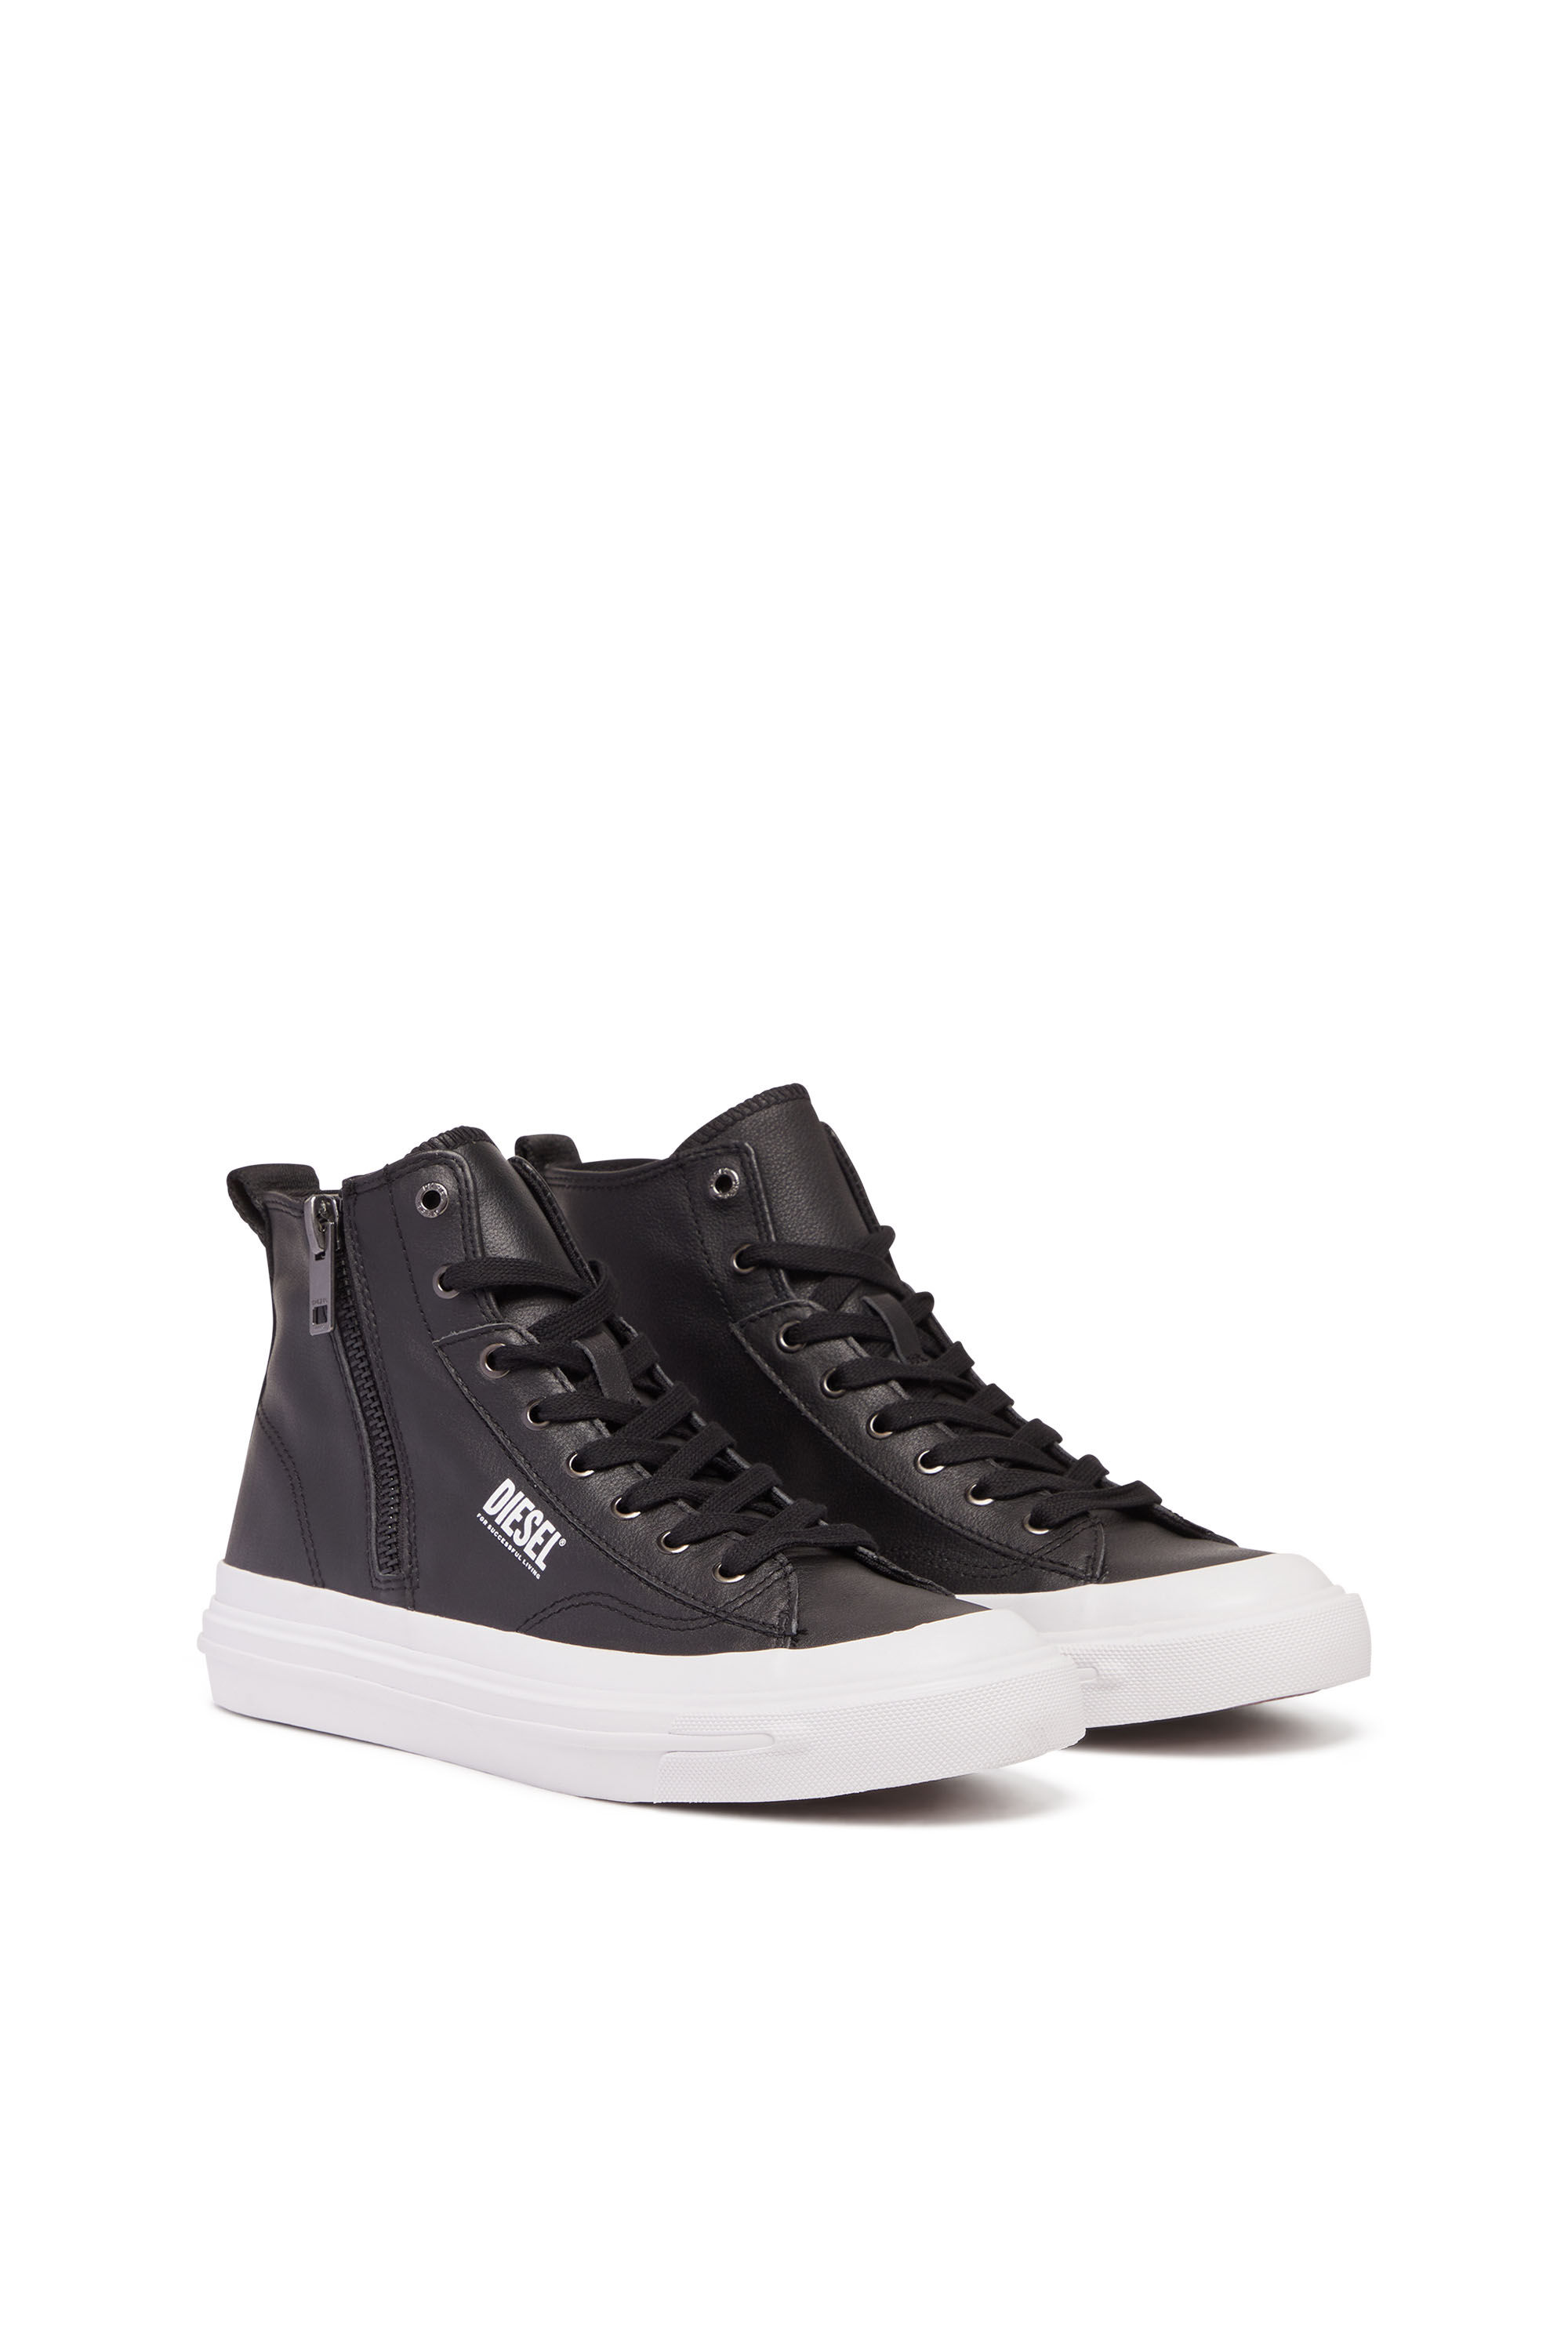 Men's S-Athos Dv Mid - High-top sneakers with side zip | S-ATHOS DV MID ...